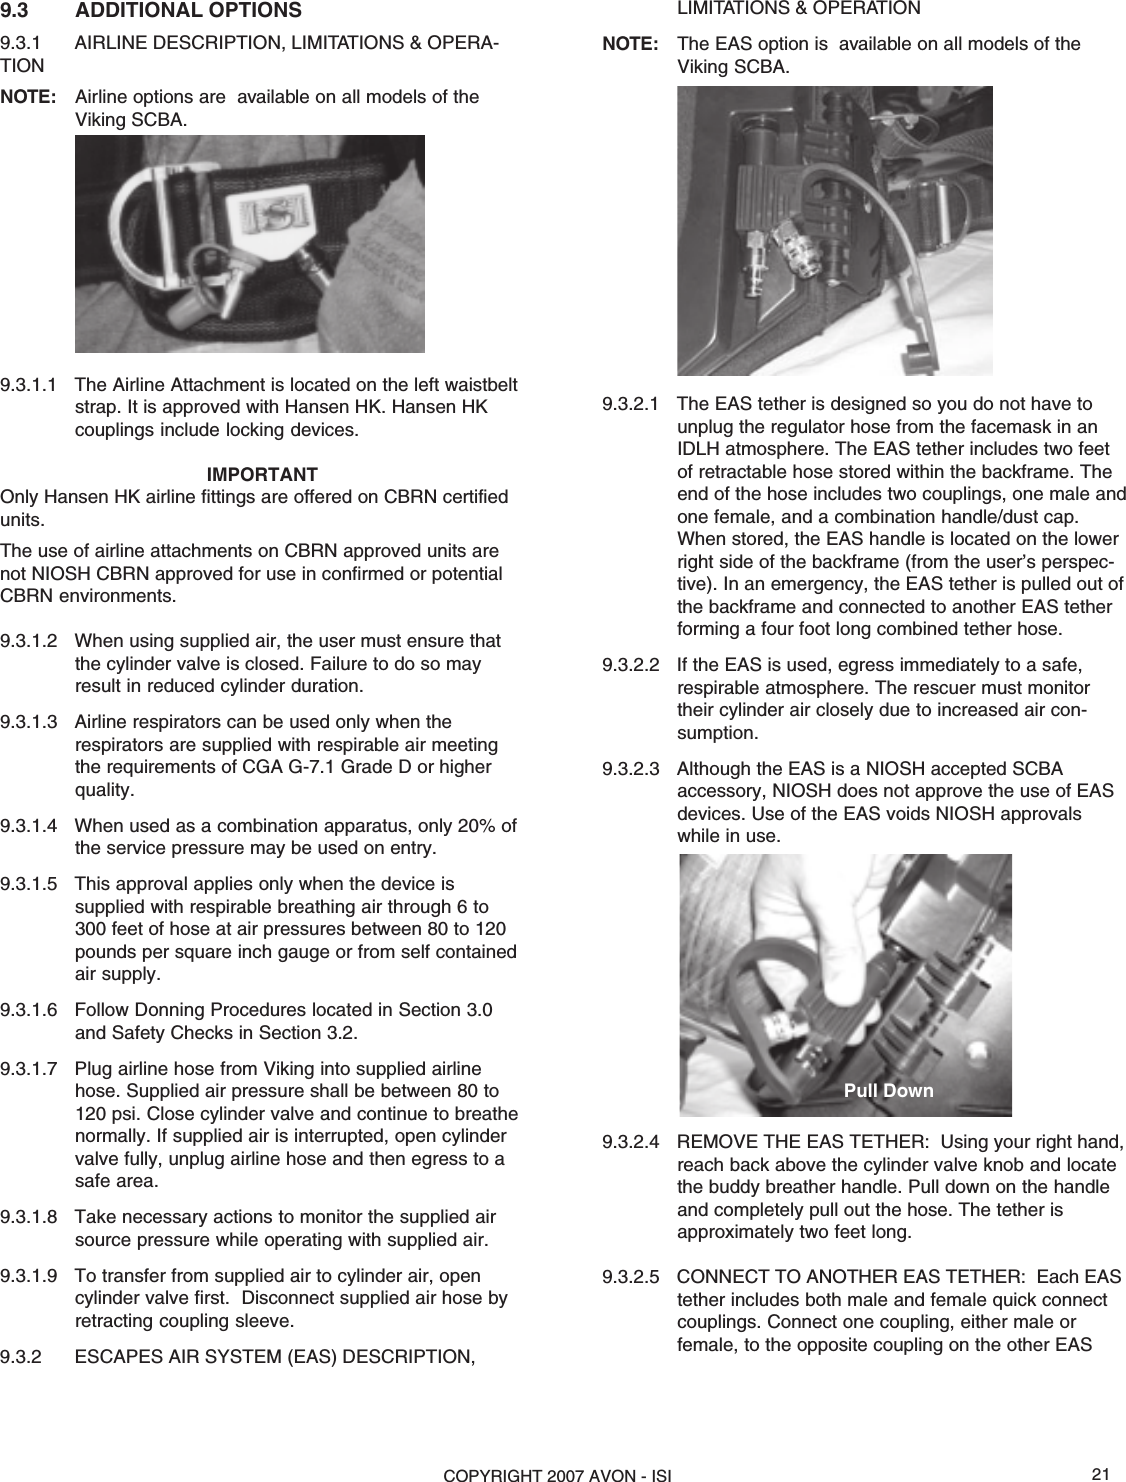 COPYRIGHT 2007 AVON - ISI 21LIMITATIONS &amp; OPERATIONNOTE: The EAS option is  available on all models of theViking SCBA.9.3.2.1 The EAS tether is designed so you do not have tounplug the regulator hose from the facemask in anIDLH atmosphere. The EAS tether includes two feetof retractable hose stored within the backframe. Theend of the hose includes two couplings, one male andone female, and a combination handle/dust cap.When stored, the EAS handle is located on the lowerright side of the backframe (from the user’s perspec-tive). In an emergency, the EAS tether is pulled out ofthe backframe and connected to another EAS tetherforming a four foot long combined tether hose.9.3.2.2 If the EAS is used, egress immediately to a safe,respirable atmosphere. The rescuer must monitortheir cylinder air closely due to increased air con-sumption.9.3.2.3 Although the EAS is a NIOSH accepted SCBAaccessory, NIOSH does not approve the use of EASdevices. Use of the EAS voids NIOSH approvalswhile in use.9.3.2.4 REMOVE THE EAS TETHER:  Using your right hand,reach back above the cylinder valve knob and locatethe buddy breather handle. Pull down on the handleand completely pull out the hose. The tether isapproximately two feet long.9.3.2.5 CONNECT TO ANOTHER EAS TETHER:  Each EAStether includes both male and female quick connectcouplings. Connect one coupling, either male orfemale, to the opposite coupling on the other EAS9.3 ADDITIONAL OPTIONS9.3.1 AIRLINE DESCRIPTION, LIMITATIONS &amp; OPERA-TIONNOTE: Airline options are  available on all models of theViking SCBA.9.3.1.1 The Airline Attachment is located on the left waistbeltstrap. It is approved with Hansen HK. Hansen HKcouplings include locking devices.IMPORTANTOnly Hansen HK airline fittings are offered on CBRN certifiedunits.The use of airline attachments on CBRN approved units arenot NIOSH CBRN approved for use in confirmed or potentialCBRN environments.9.3.1.2 When using supplied air, the user must ensure thatthe cylinder valve is closed. Failure to do so mayresult in reduced cylinder duration.9.3.1.3 Airline respirators can be used only when therespirators are supplied with respirable air meetingthe requirements of CGA G-7.1 Grade D or higherquality.9.3.1.4 When used as a combination apparatus, only 20% ofthe service pressure may be used on entry.9.3.1.5 This approval applies only when the device issupplied with respirable breathing air through 6 to300 feet of hose at air pressures between 80 to 120pounds per square inch gauge or from self containedair supply.9.3.1.6 Follow Donning Procedures located in Section 3.0and Safety Checks in Section 3.2.9.3.1.7 Plug airline hose from Viking into supplied airlinehose. Supplied air pressure shall be between 80 to120 psi. Close cylinder valve and continue to breathenormally. If supplied air is interrupted, open cylindervalve fully, unplug airline hose and then egress to asafe area.9.3.1.8 Take necessary actions to monitor the supplied airsource pressure while operating with supplied air.9.3.1.9 To transfer from supplied air to cylinder air, opencylinder valve first.  Disconnect supplied air hose byretracting coupling sleeve.9.3.2 ESCAPES AIR SYSTEM (EAS) DESCRIPTION,Pull Down